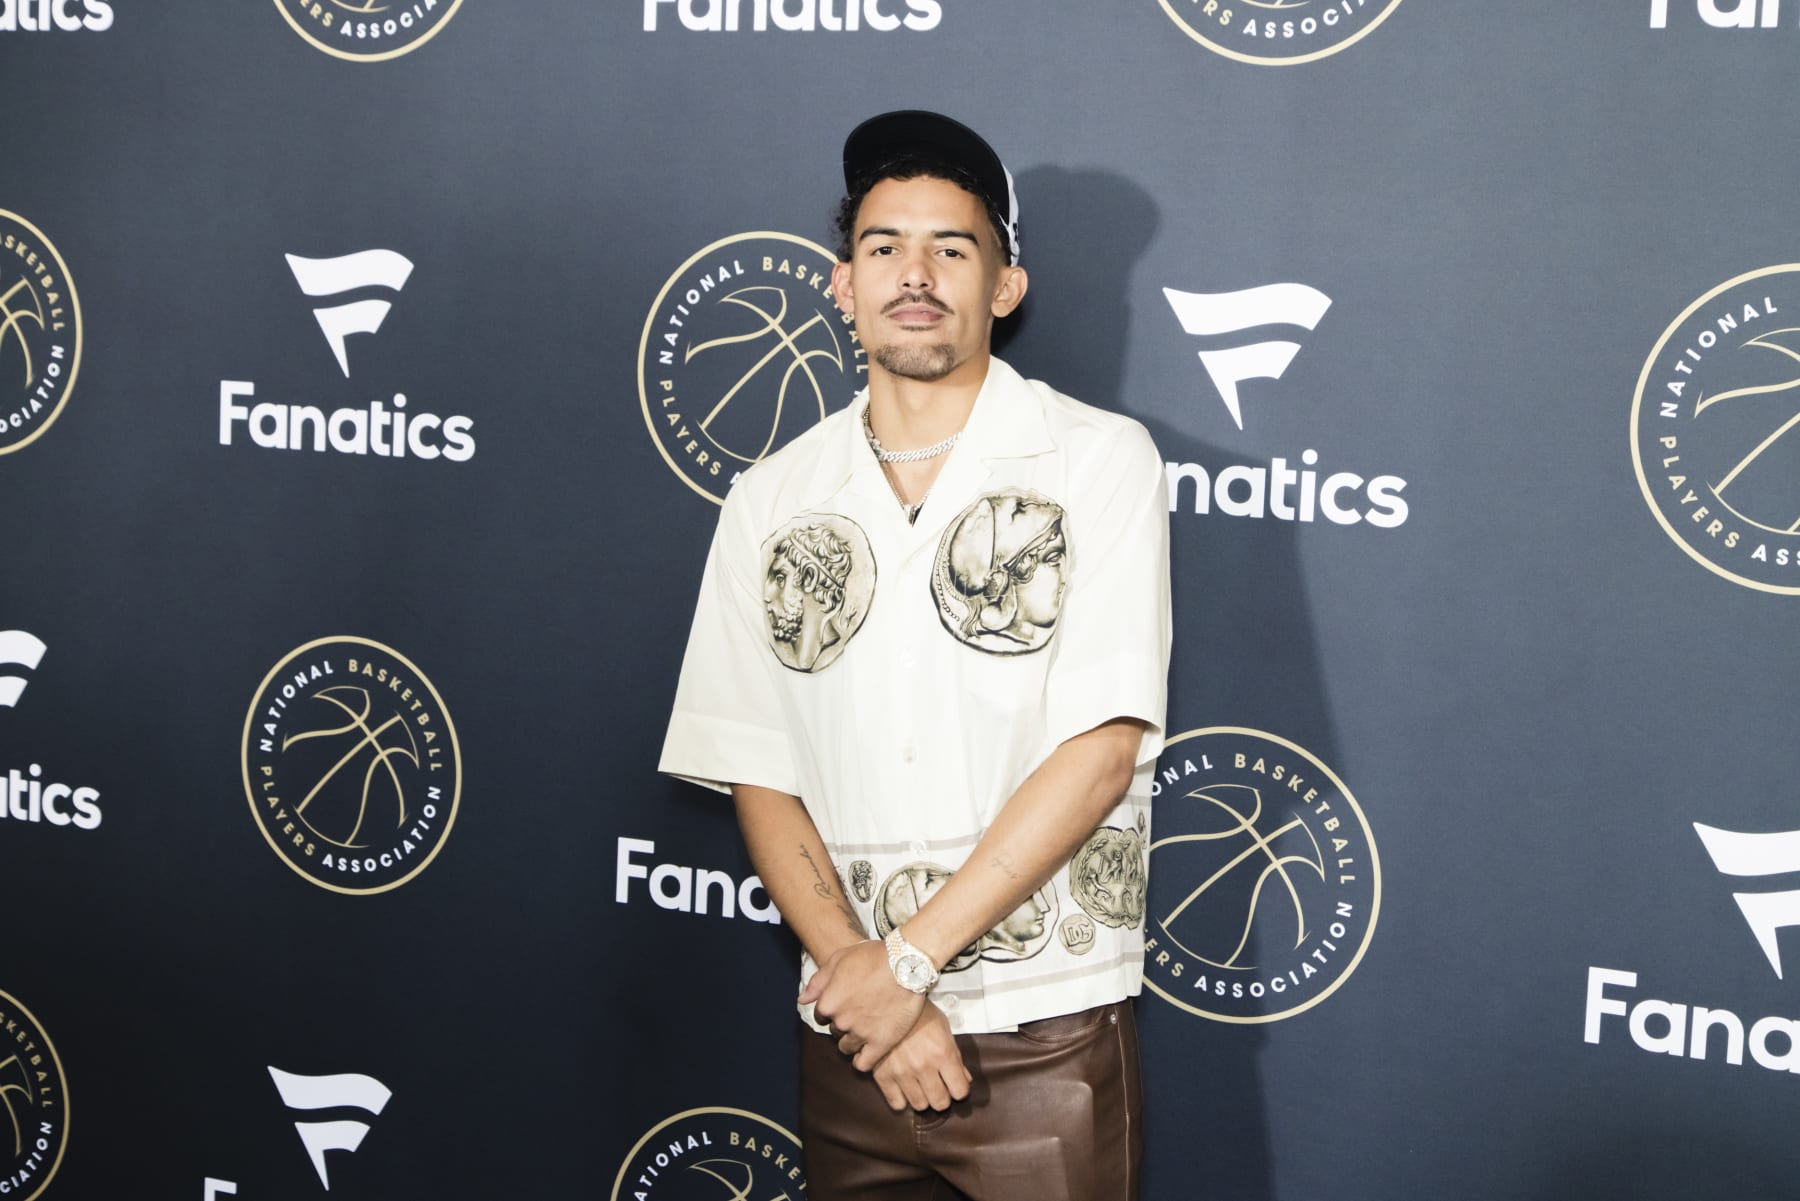 Trae Young makes his case for Team USA selection - Basketball Network -  Your daily dose of basketball